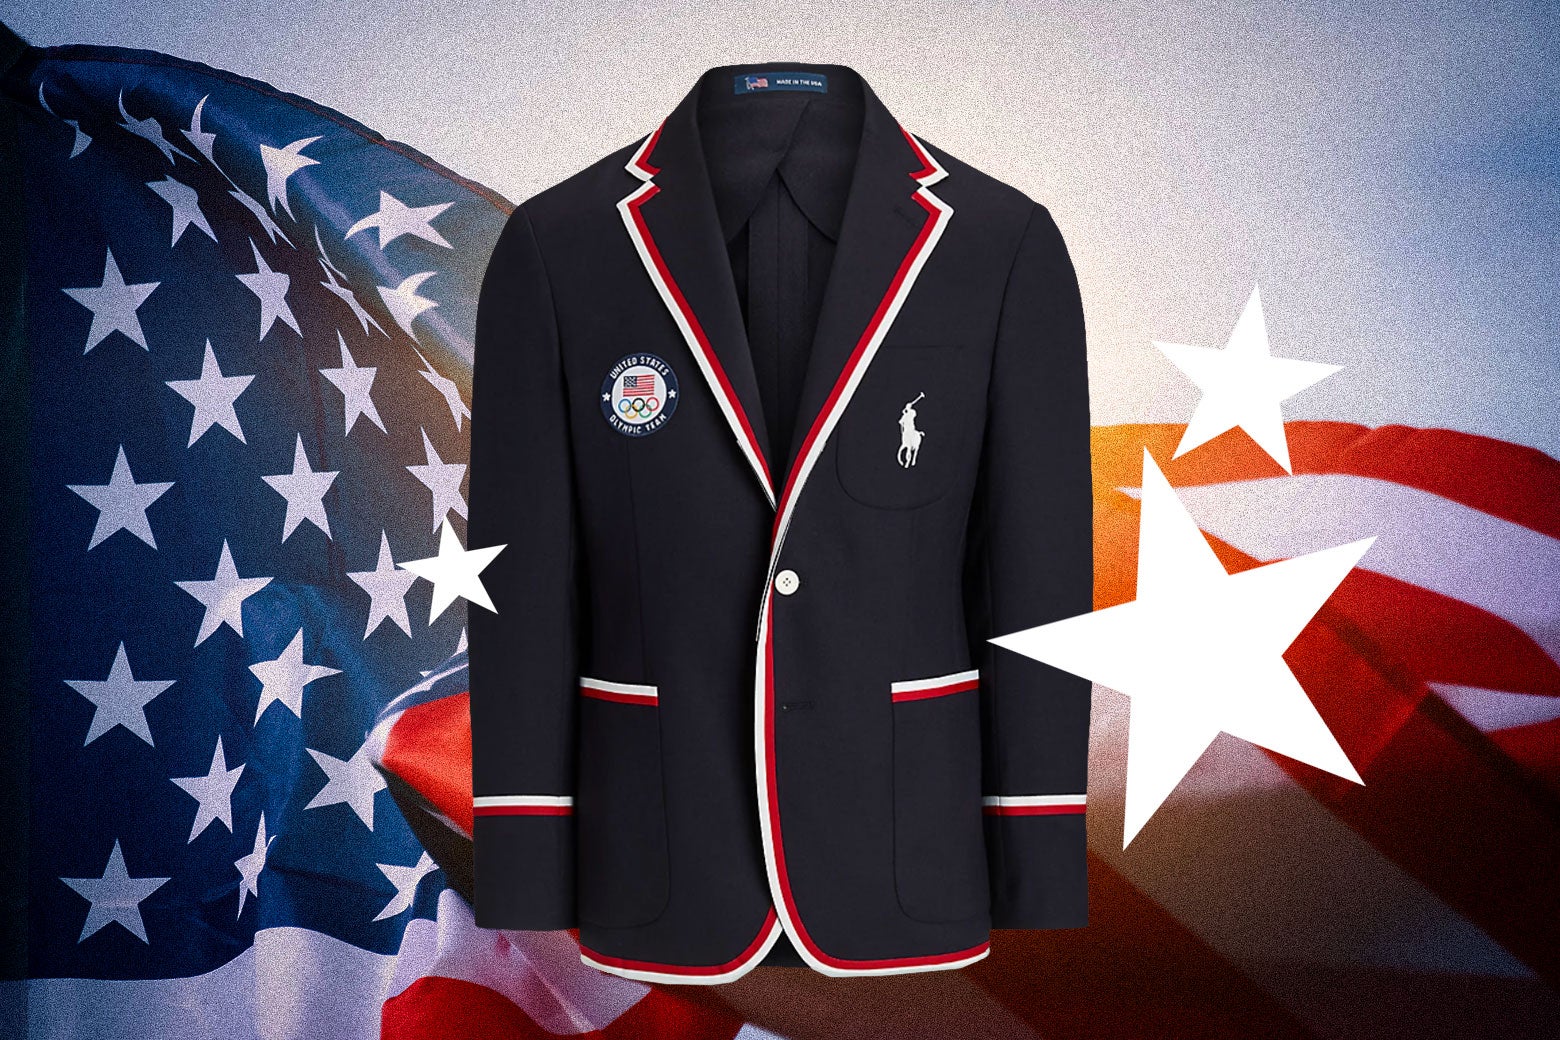 Why Must Team USA’s Olympics Uniforms Always Make the Same Mistake?